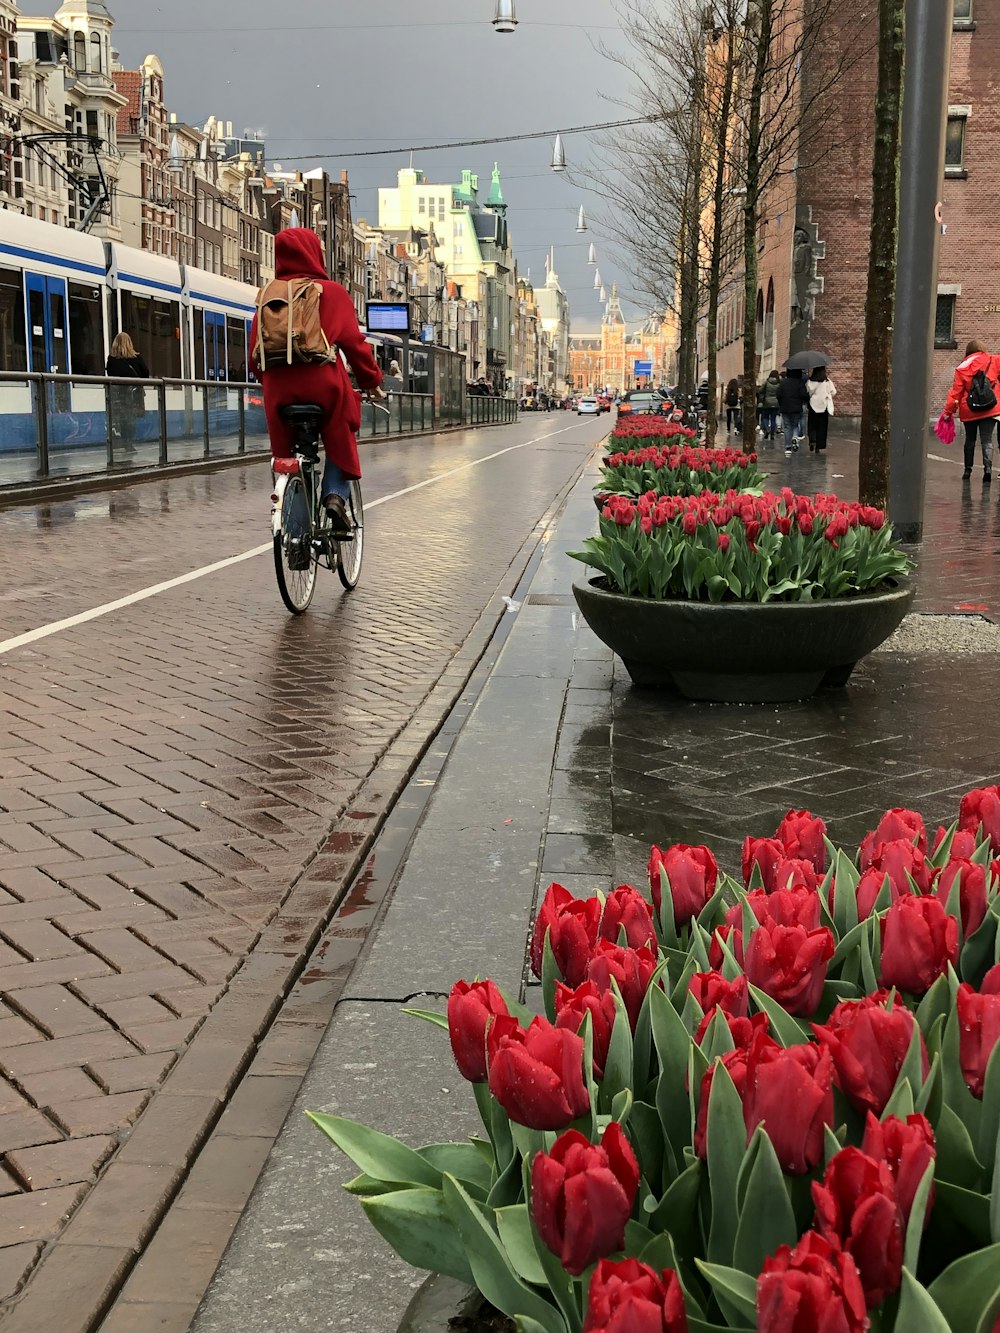 person riding on bicycle passing by flowers